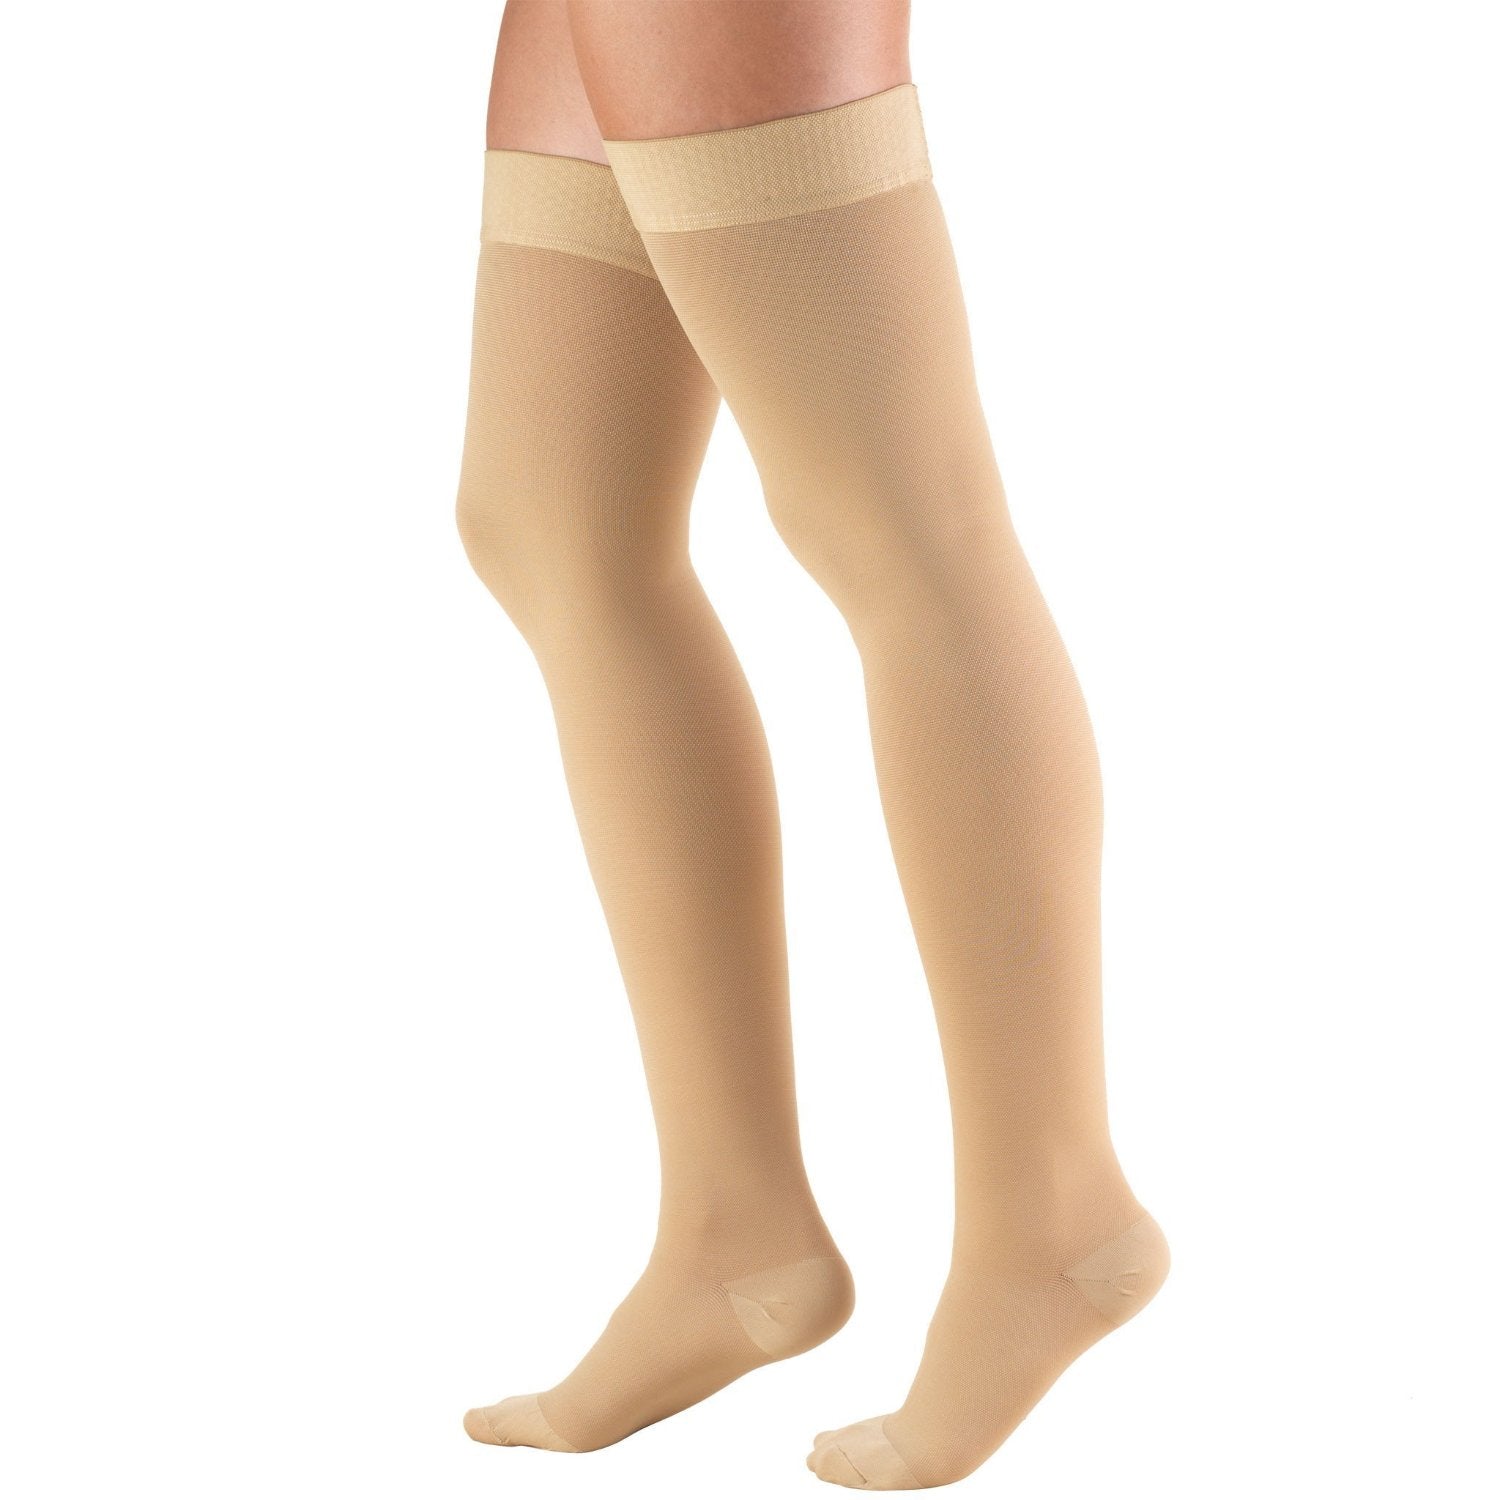 Compression Stockings Thigh High 20-30 mmHg for Women Men, Graduated  Compression Socks with Non-Slide Silicone Dot Band, Open Toe, Support  Sculpt